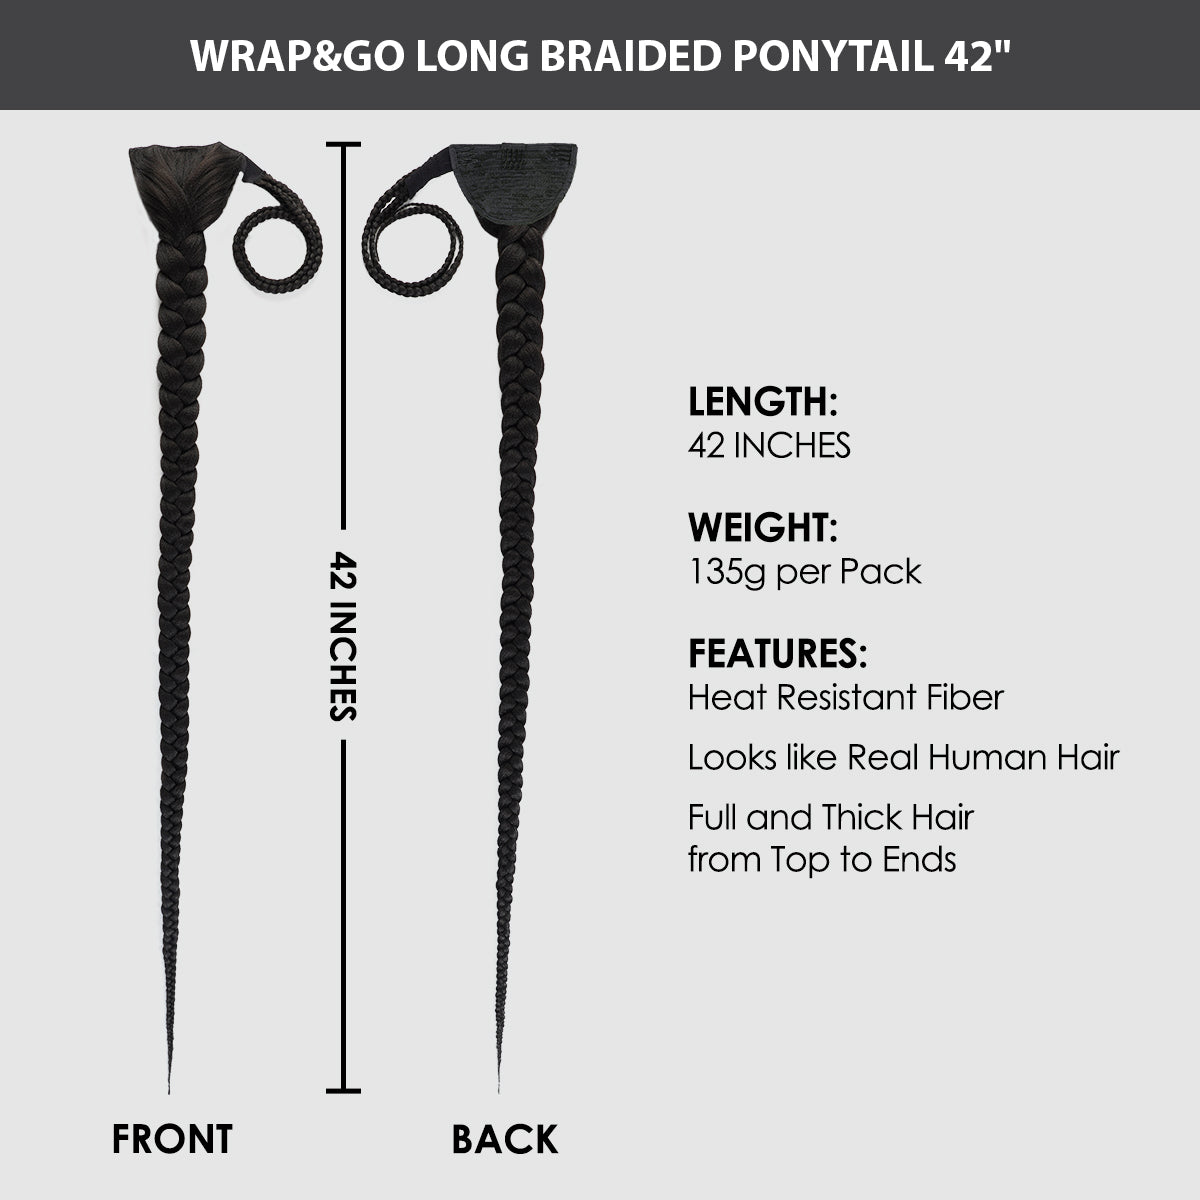 wrap and go long braided ponytail, 42 inch braided ponytail, 42 inch length ponytail, heat resistant fiber ponytail, looks like real human hair, full and think ponytail